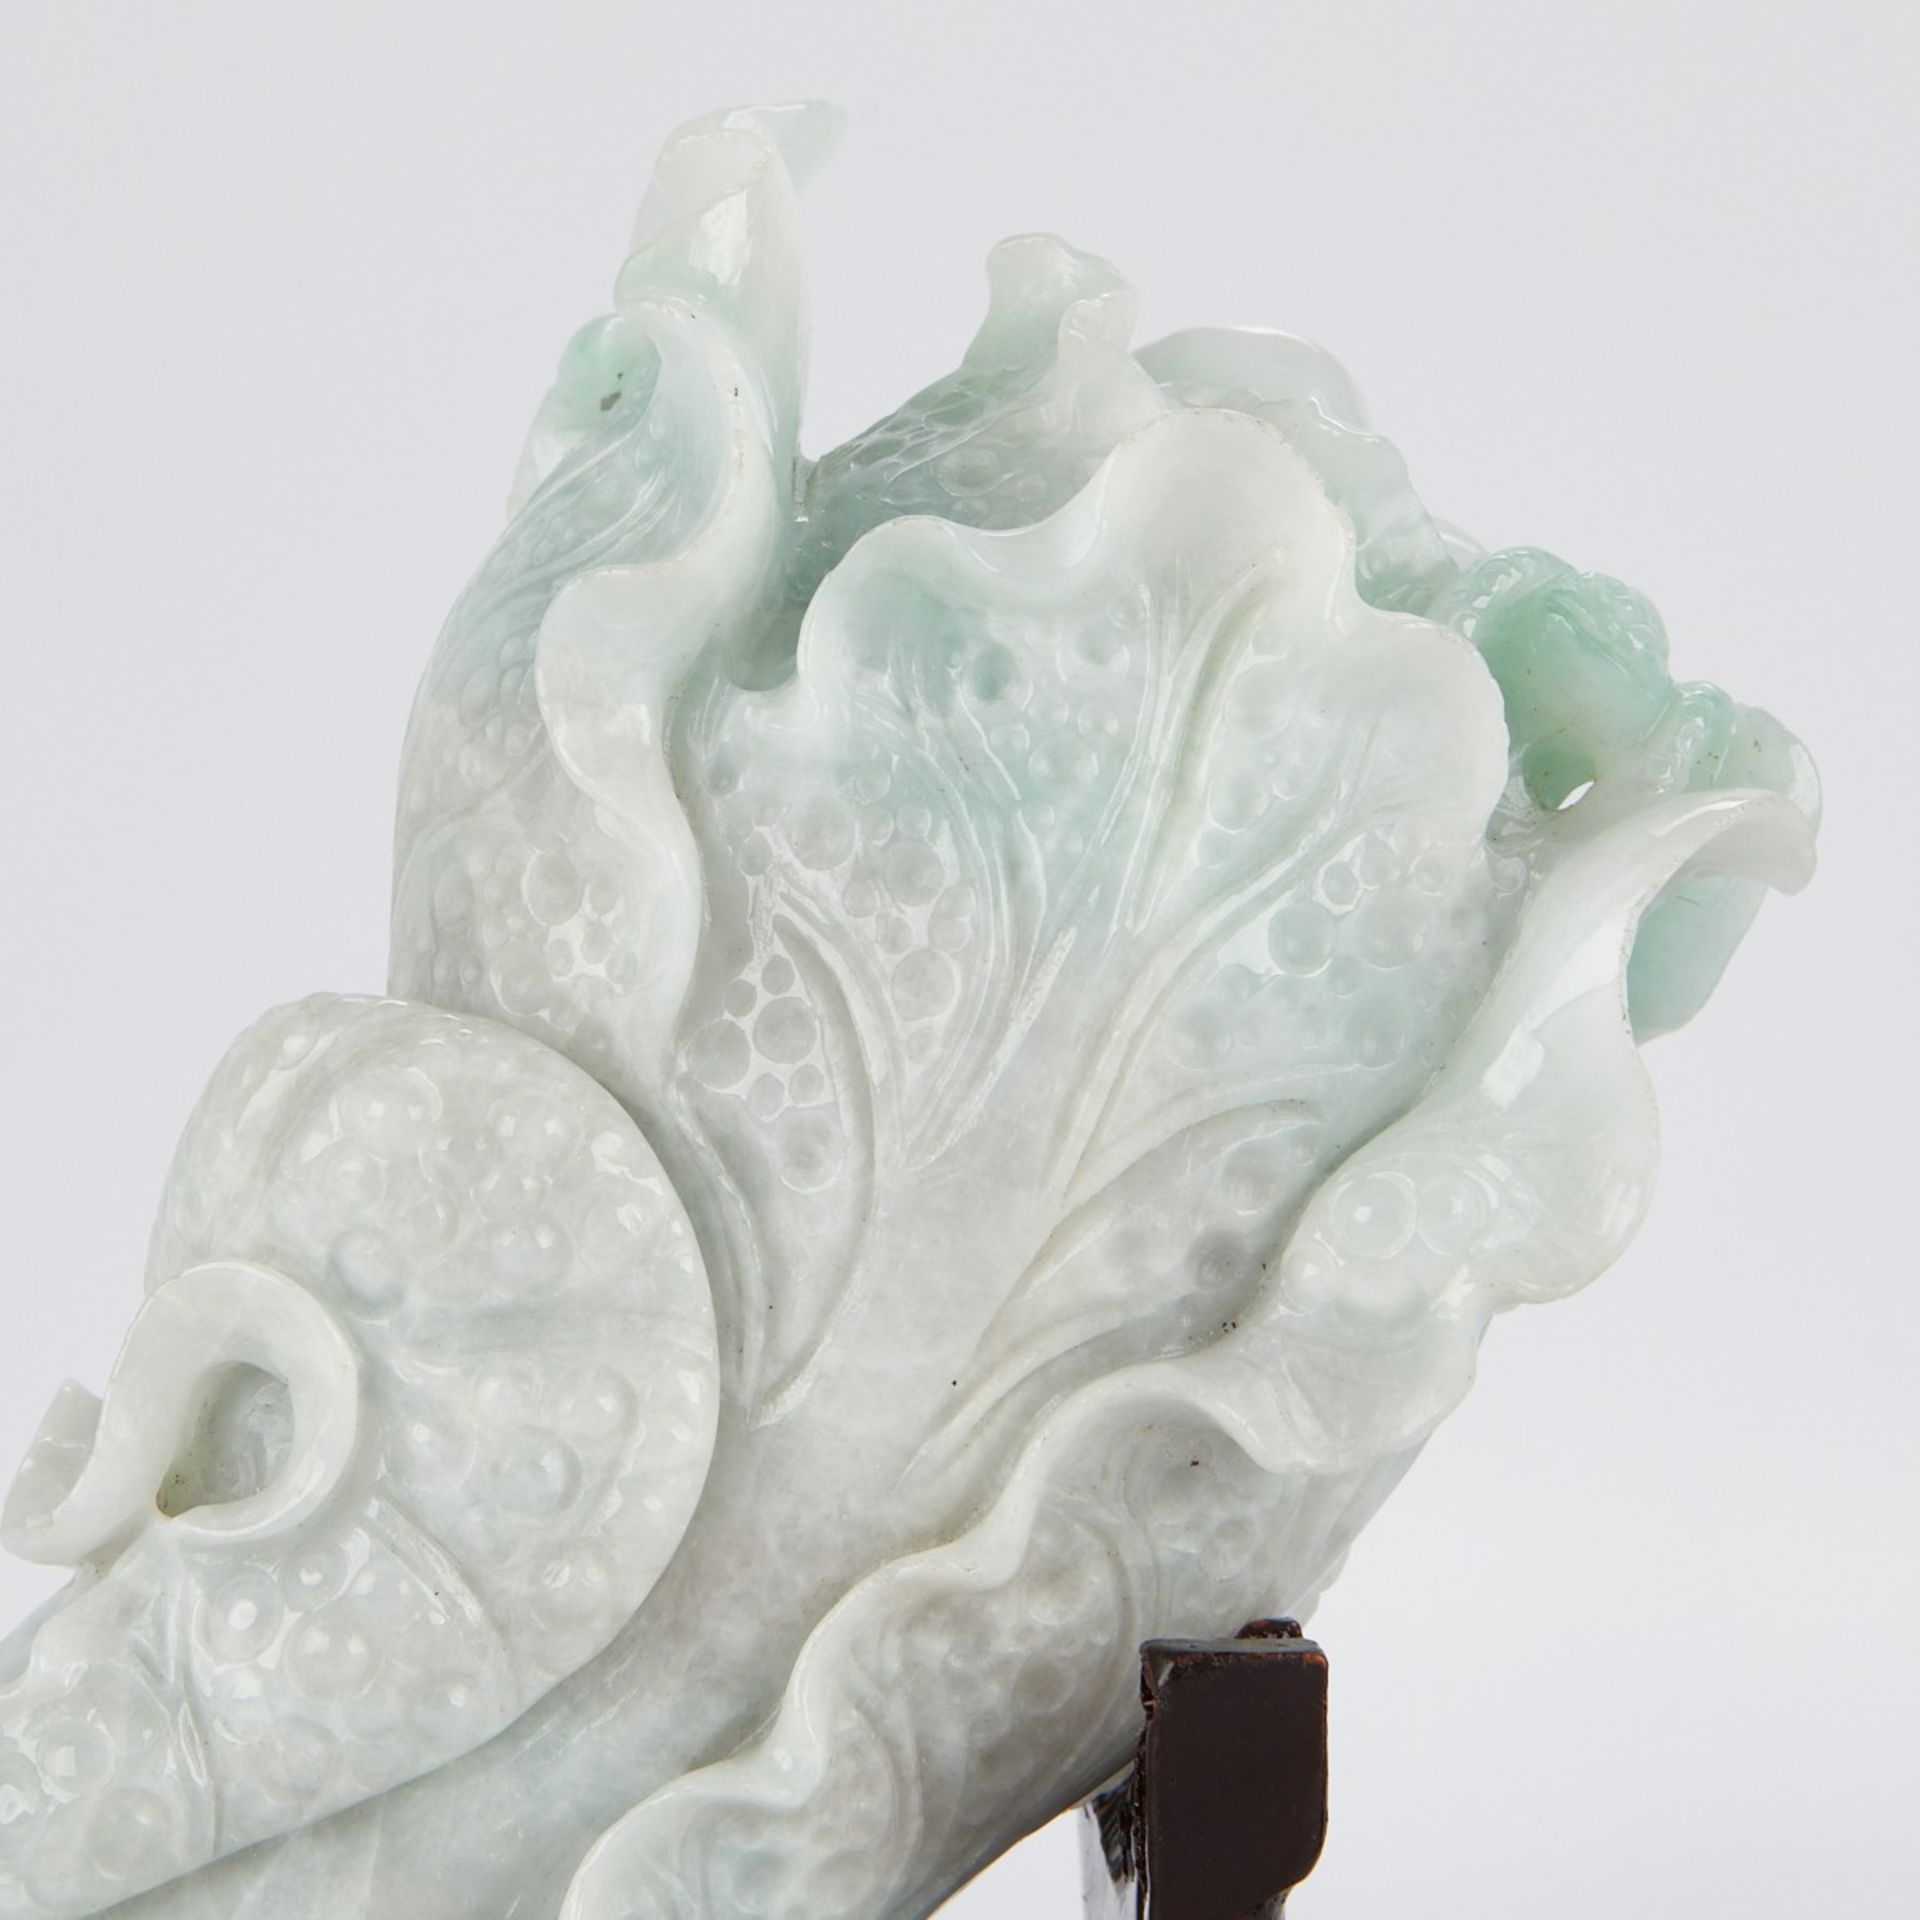 2 Fine Chinese Carved Jade Cabbages - Image 6 of 11